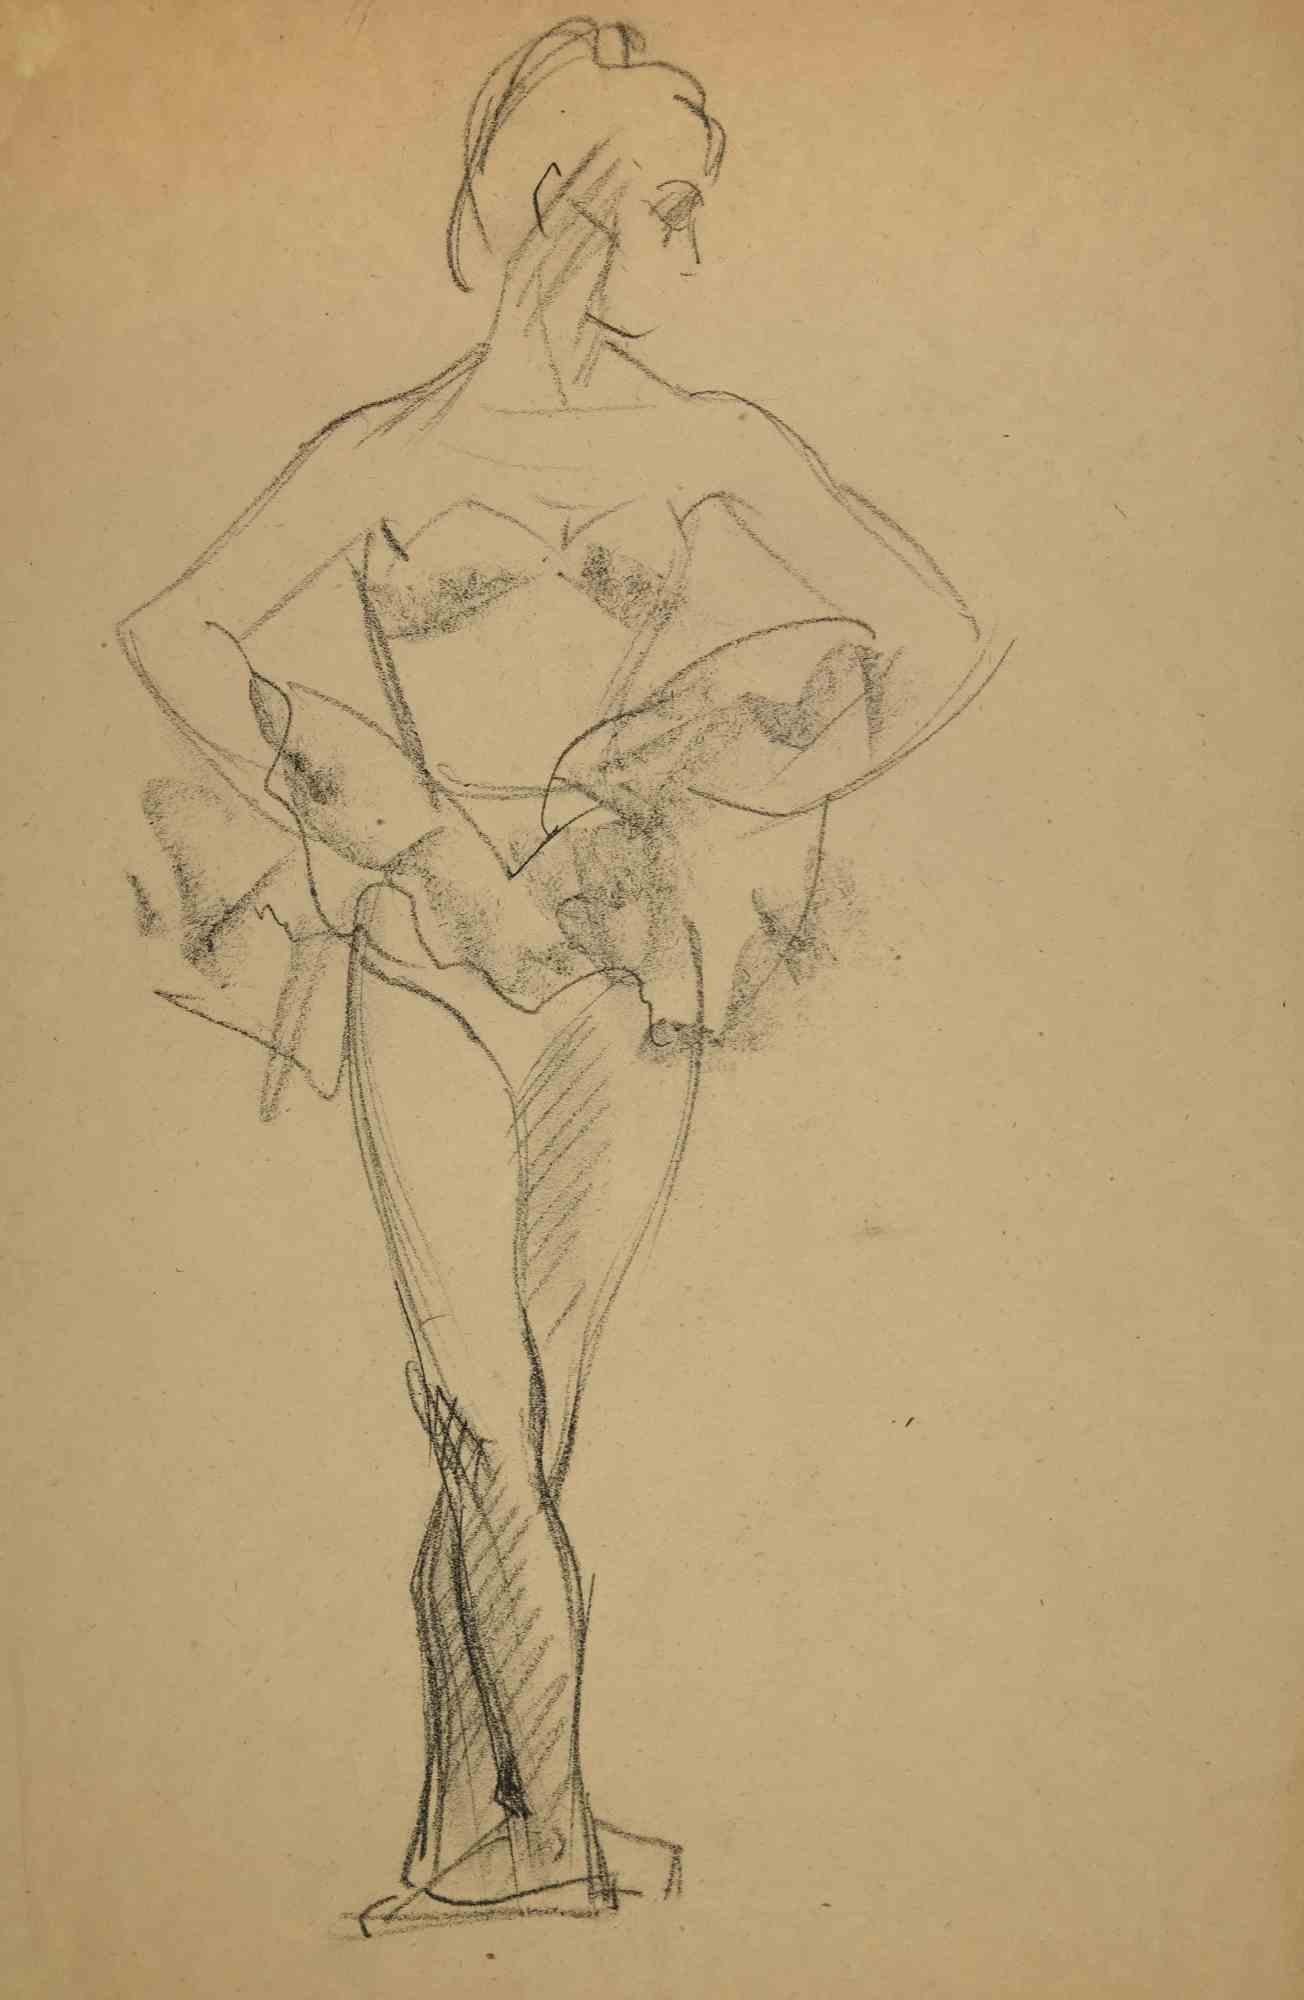 Dancer is a drawing made by Simone Vaulpré during the 20th century.

Pencil on paper.

Good condition.
